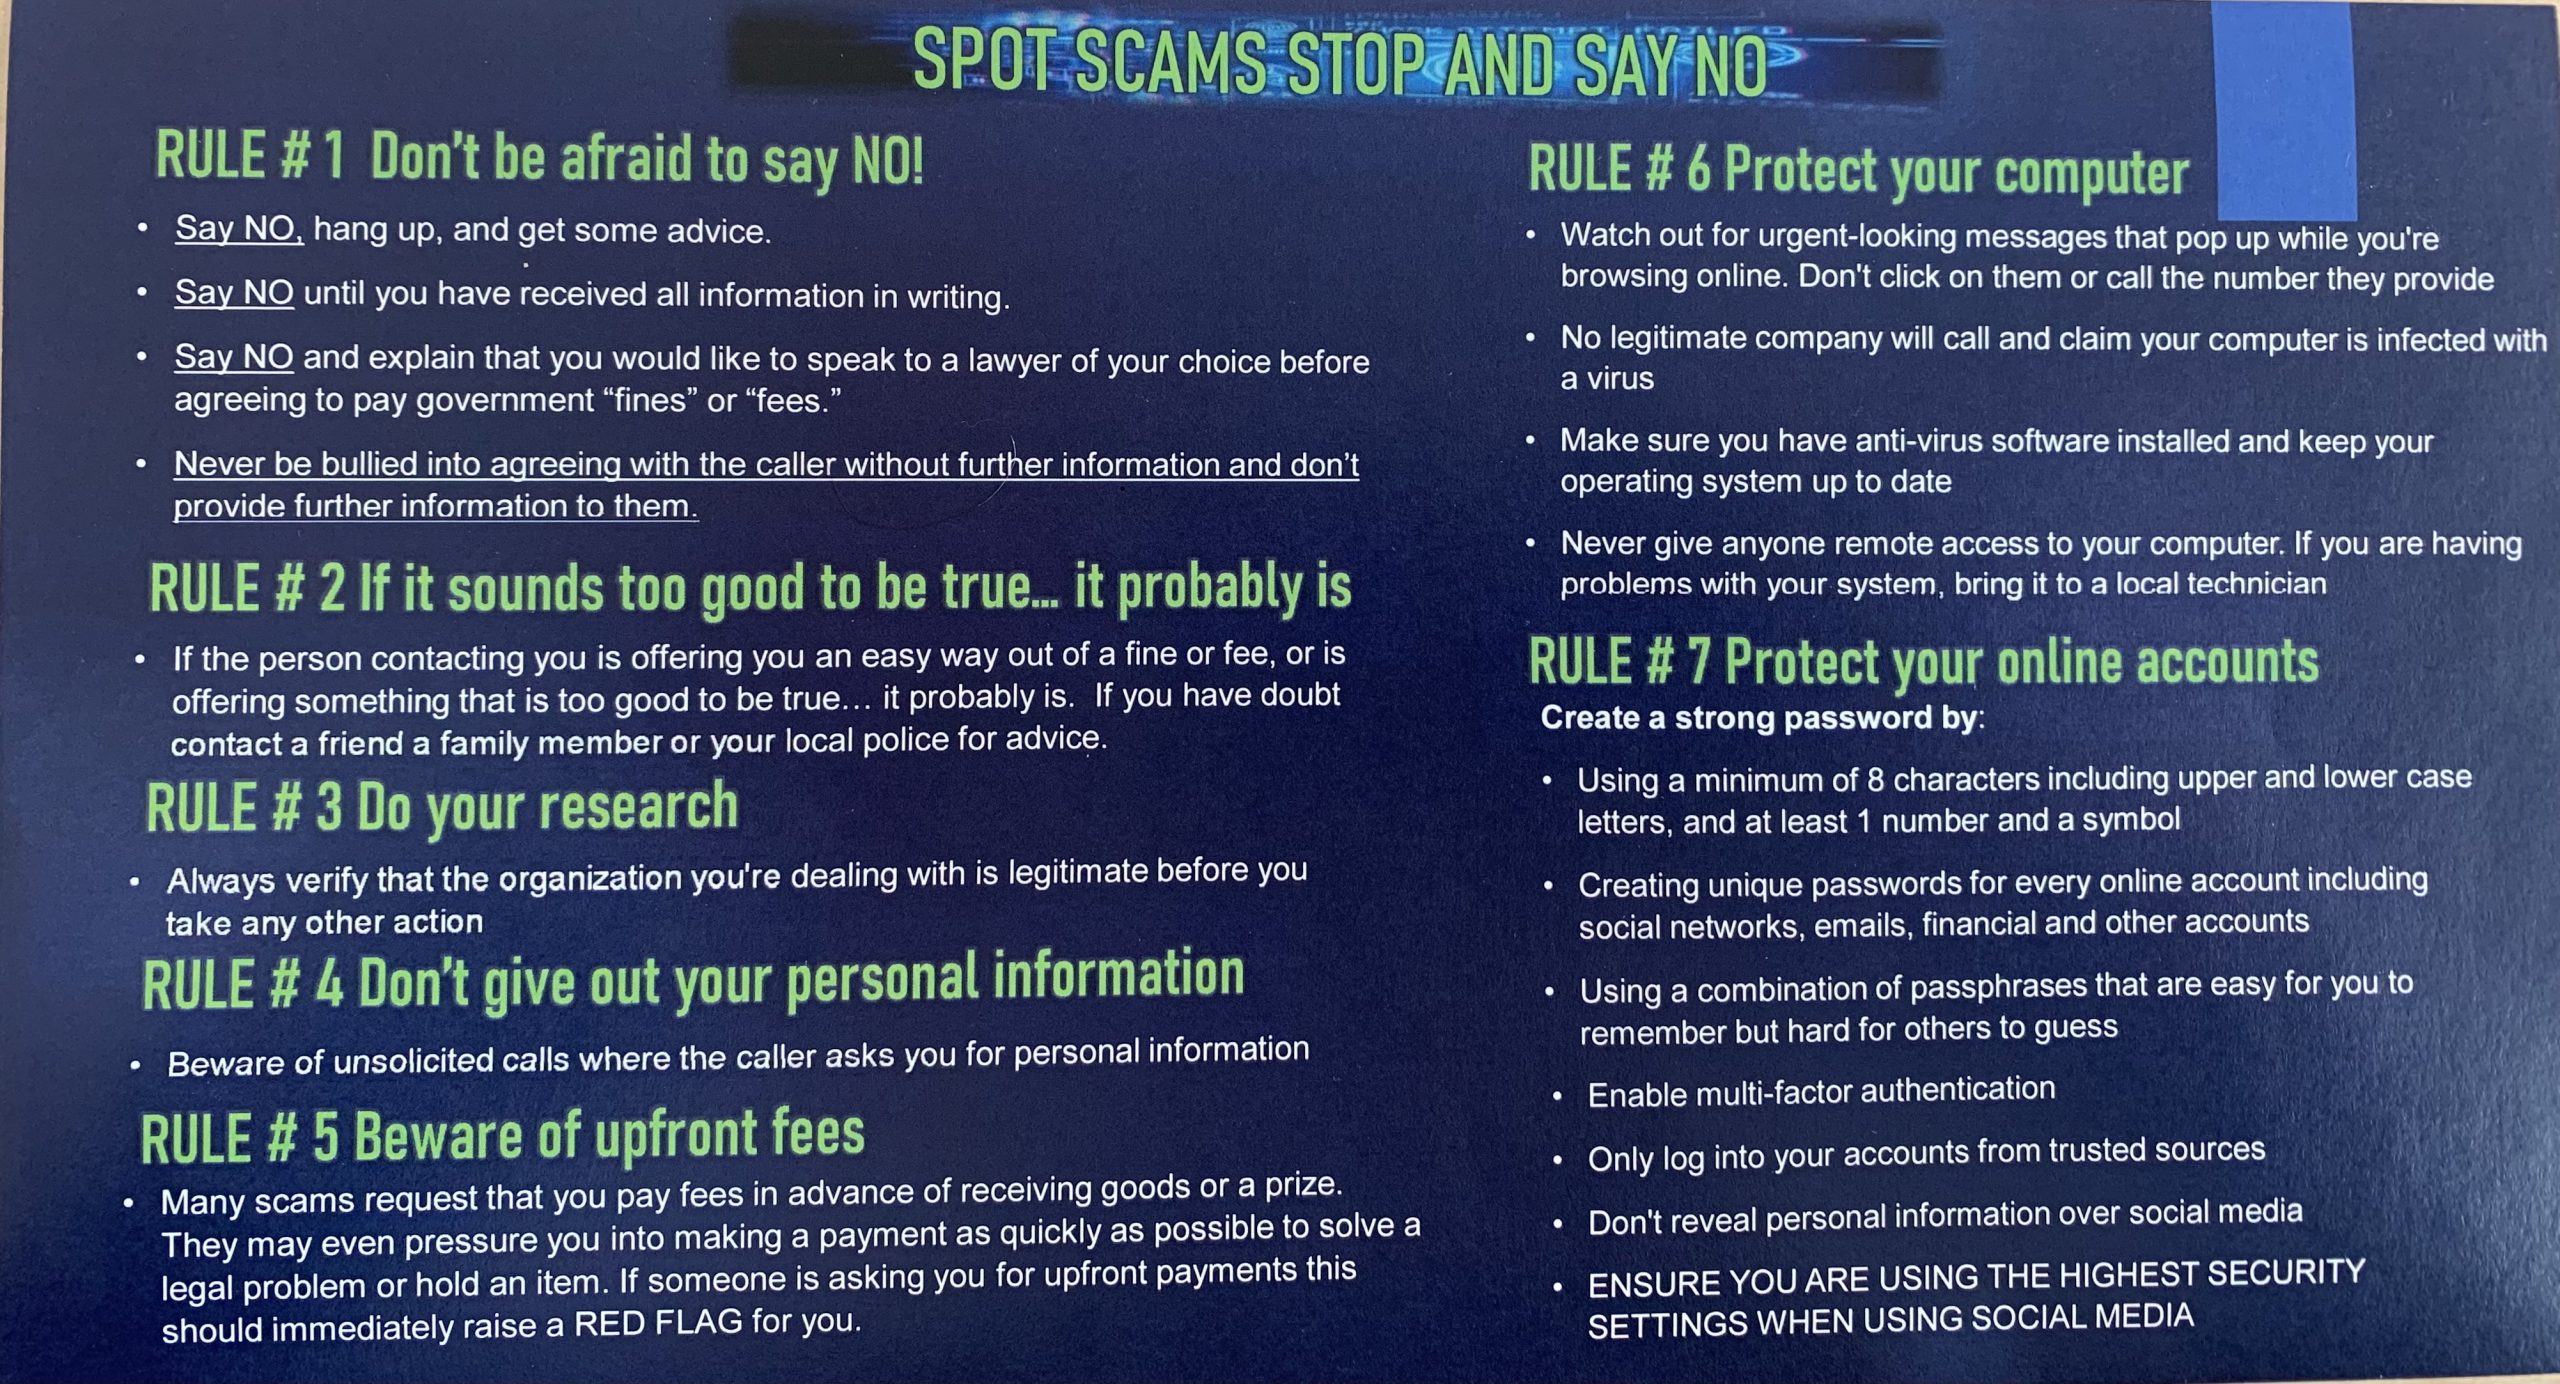 Image with text including seven rules to prevent scams